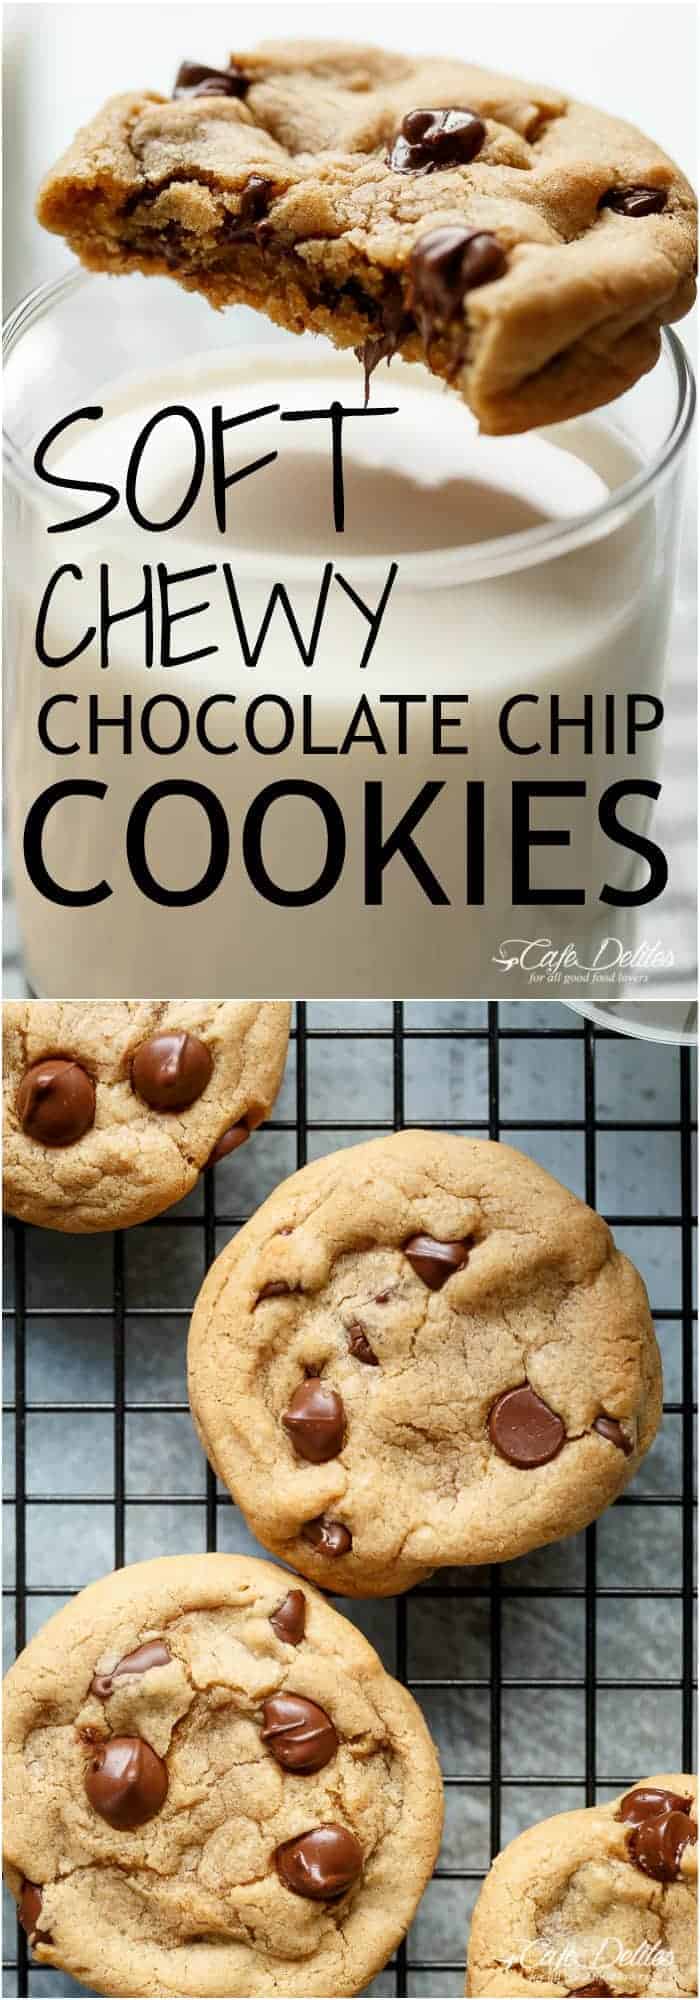 How to Make Flat Cookies: Perfectly Flattened Delights in Minutes